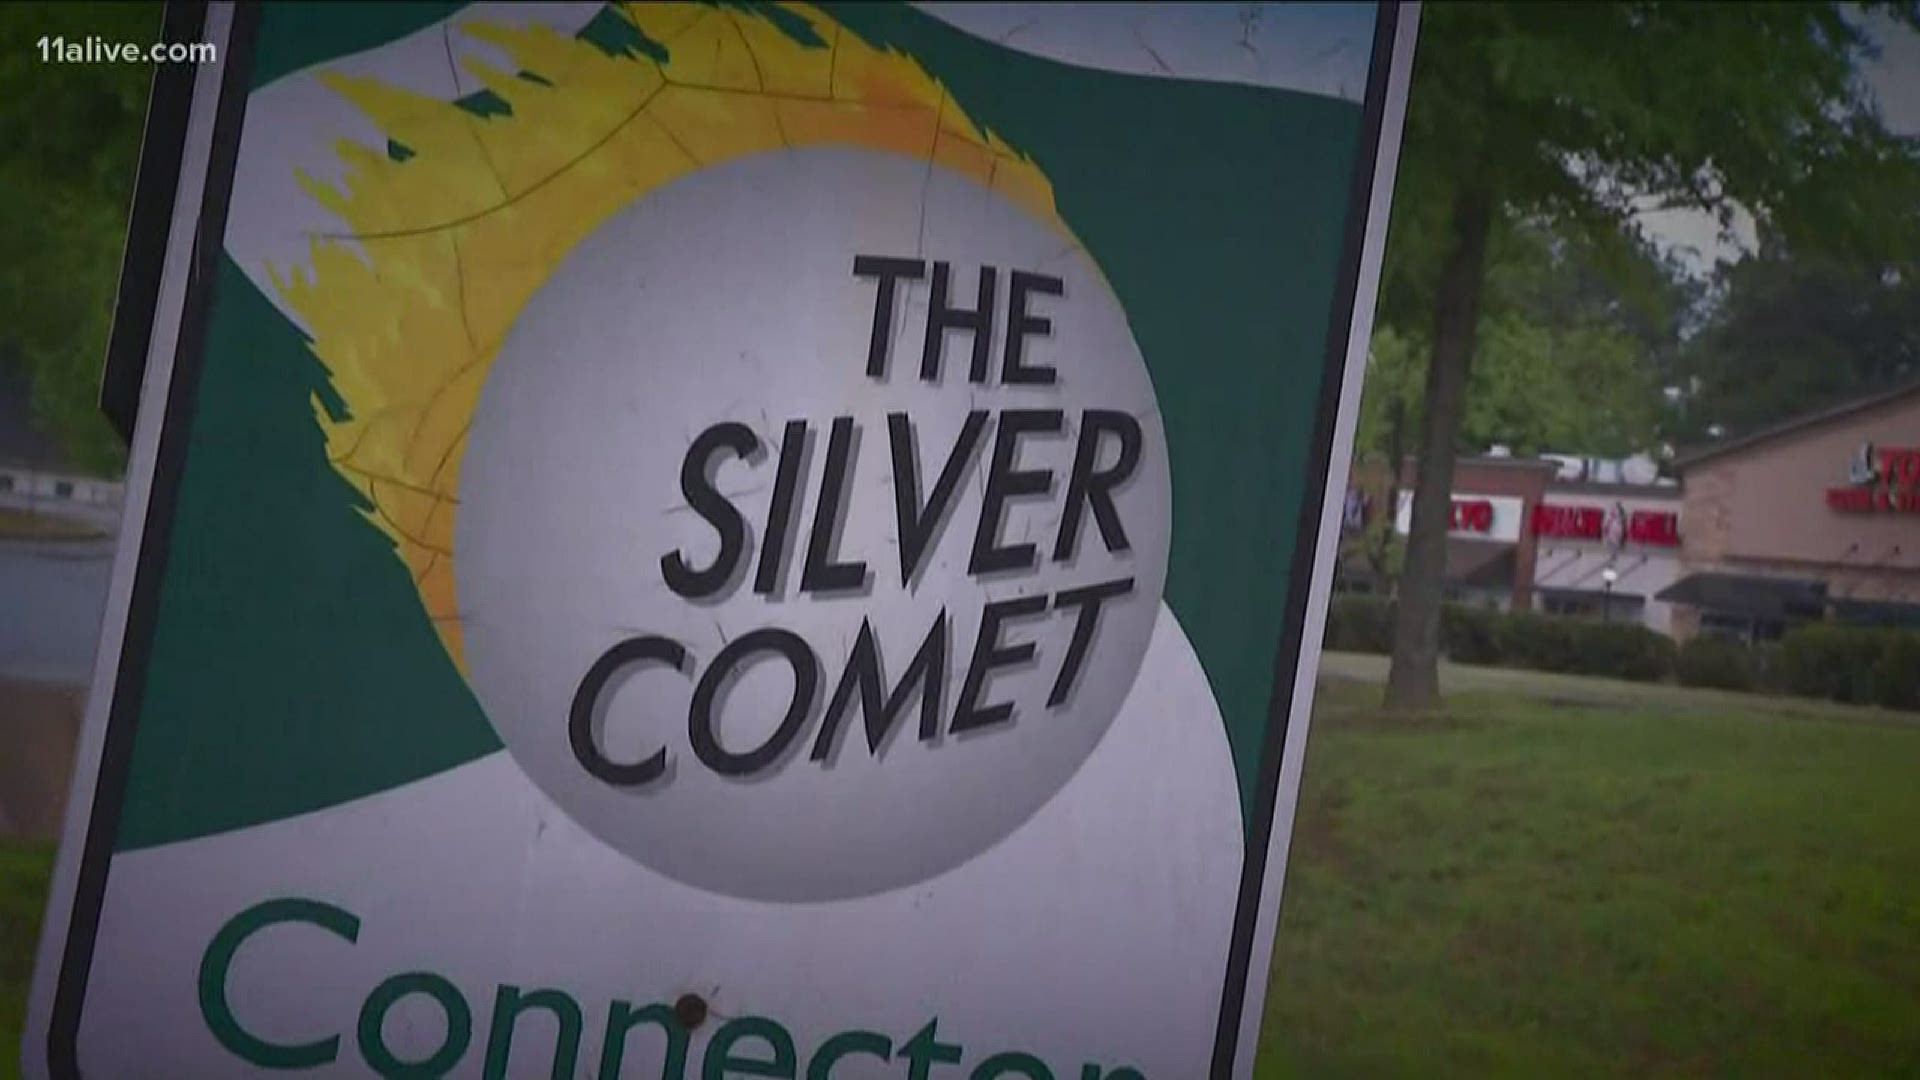 Cobb County officials decided to begin relaxing restrictions on some trails and in some parks beginning on Saturday, including on the popular Silver Comet Trail.